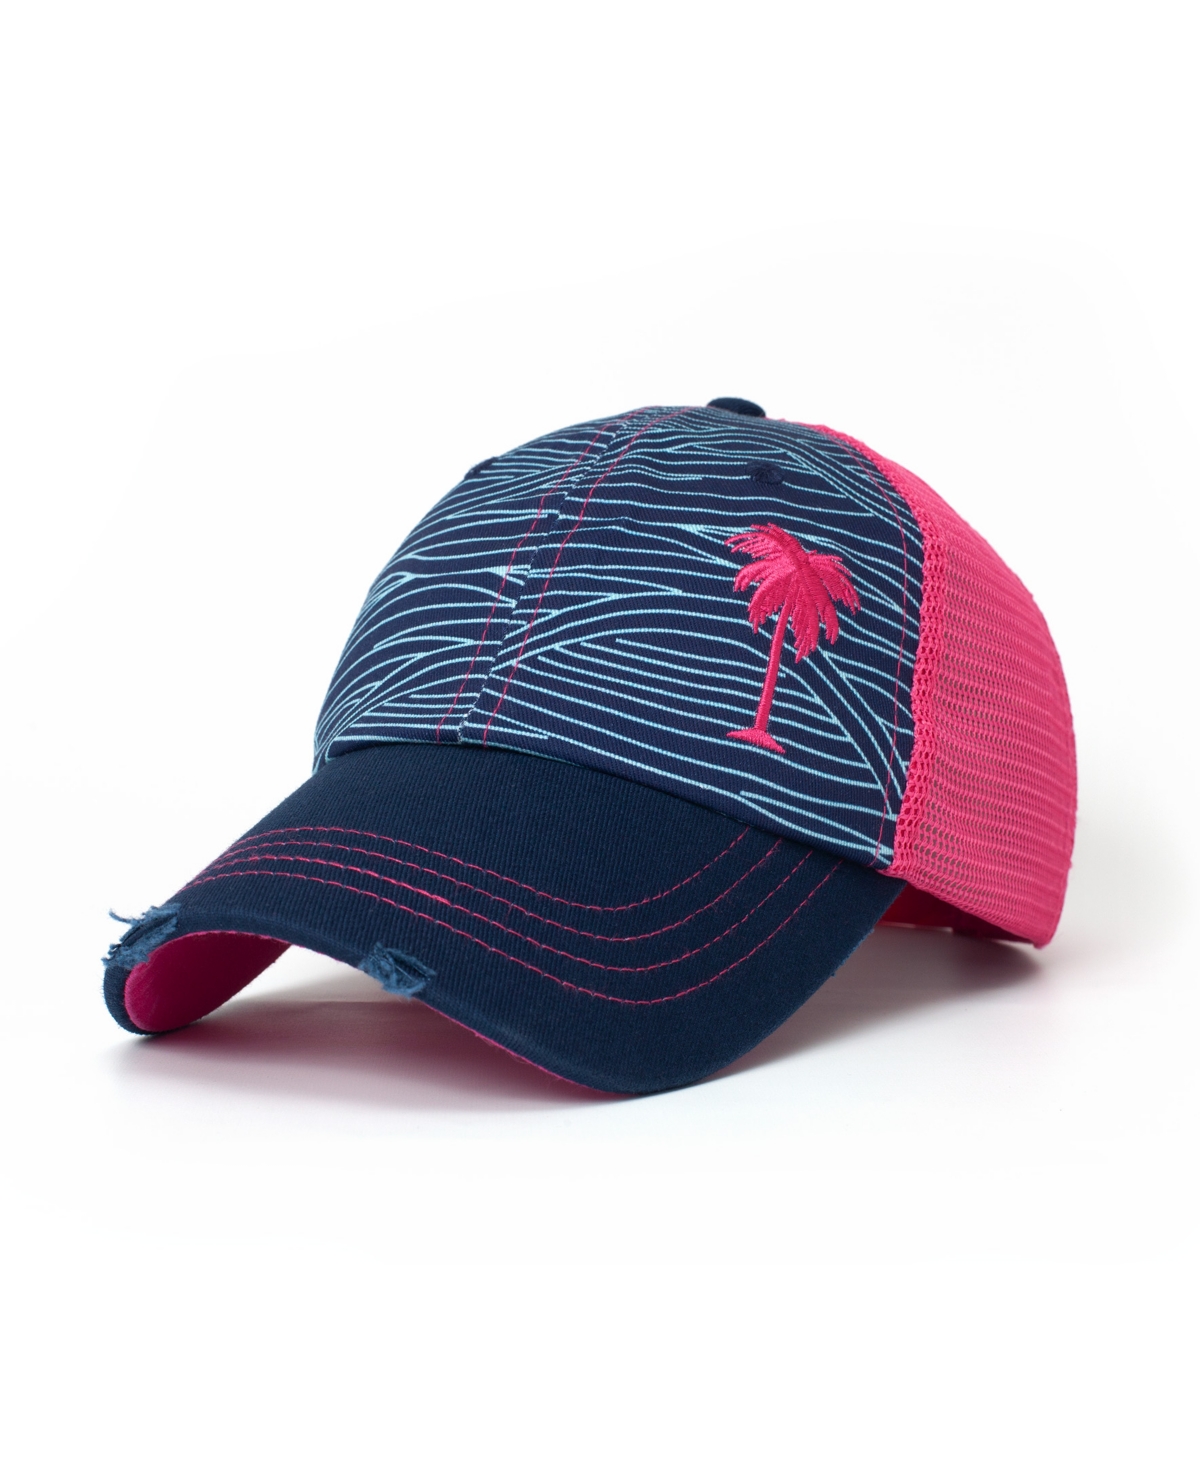 Shady Lady Shady Kids Adjustable Snap Back Mesh Palm Tree Trucker Hat In Pink,blue